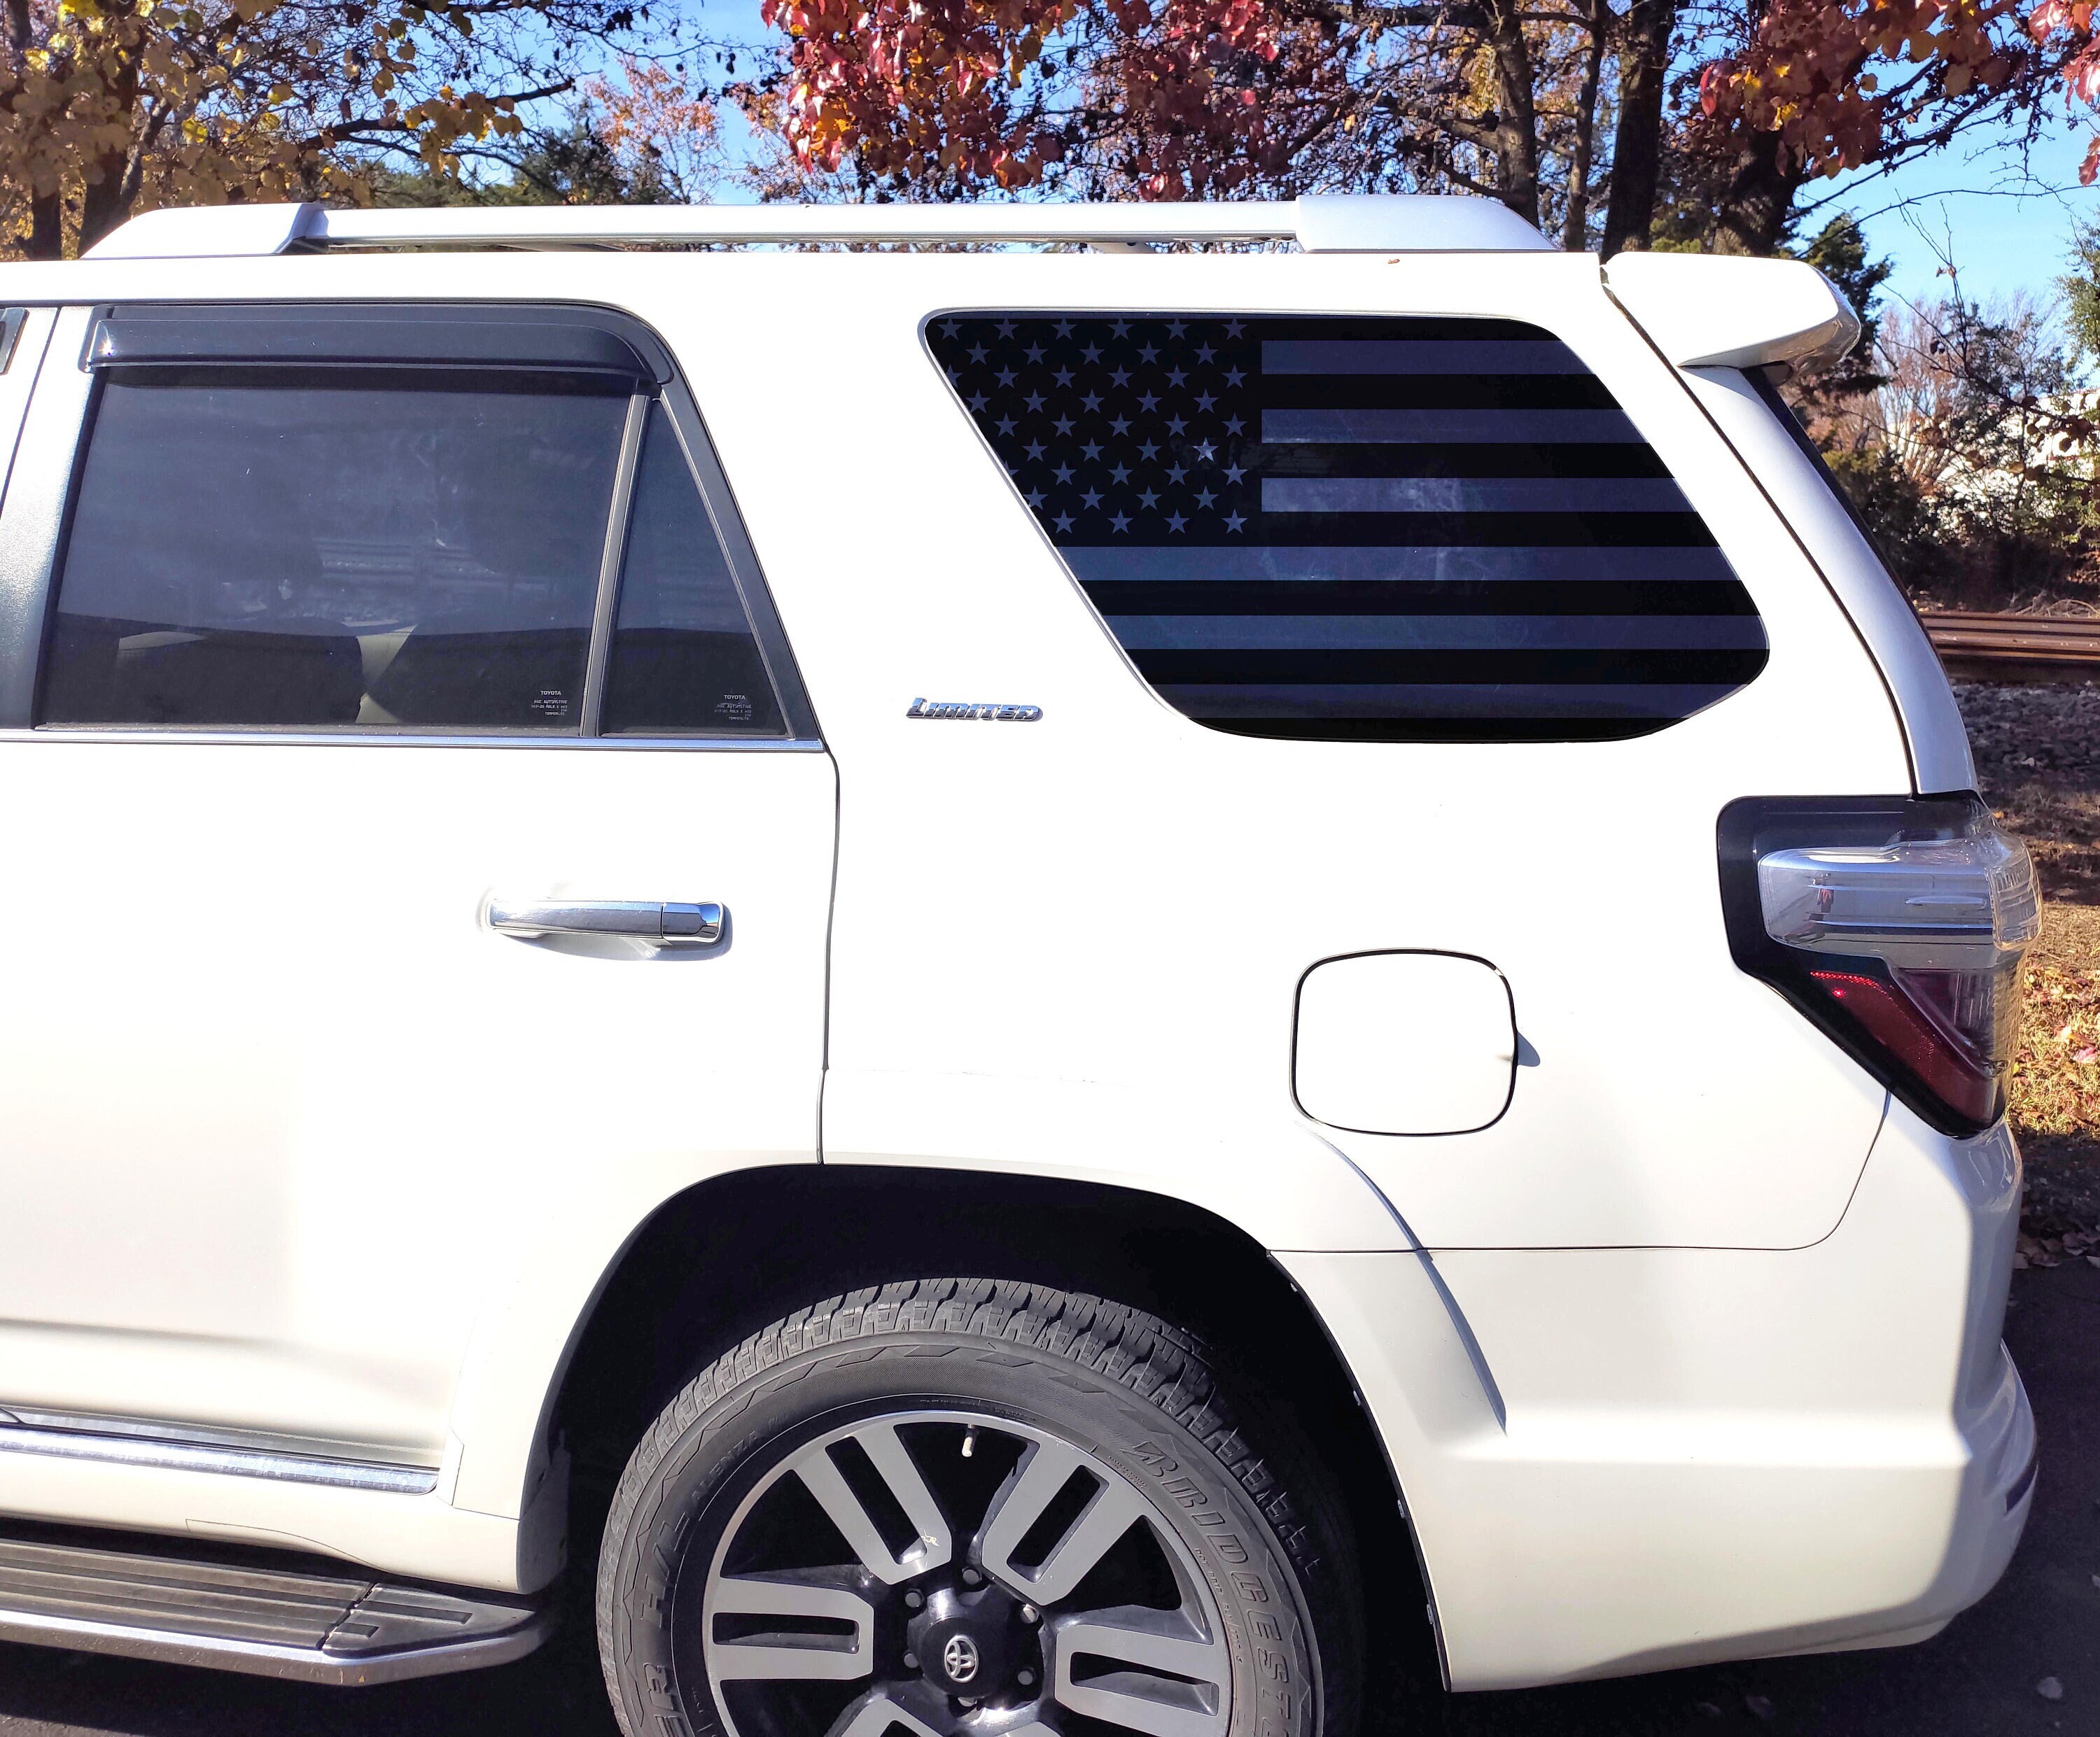 Subaru Forester QB1D.A Distressed USA American Flag Decals in Matte Black for side windows fits 2014-2018 